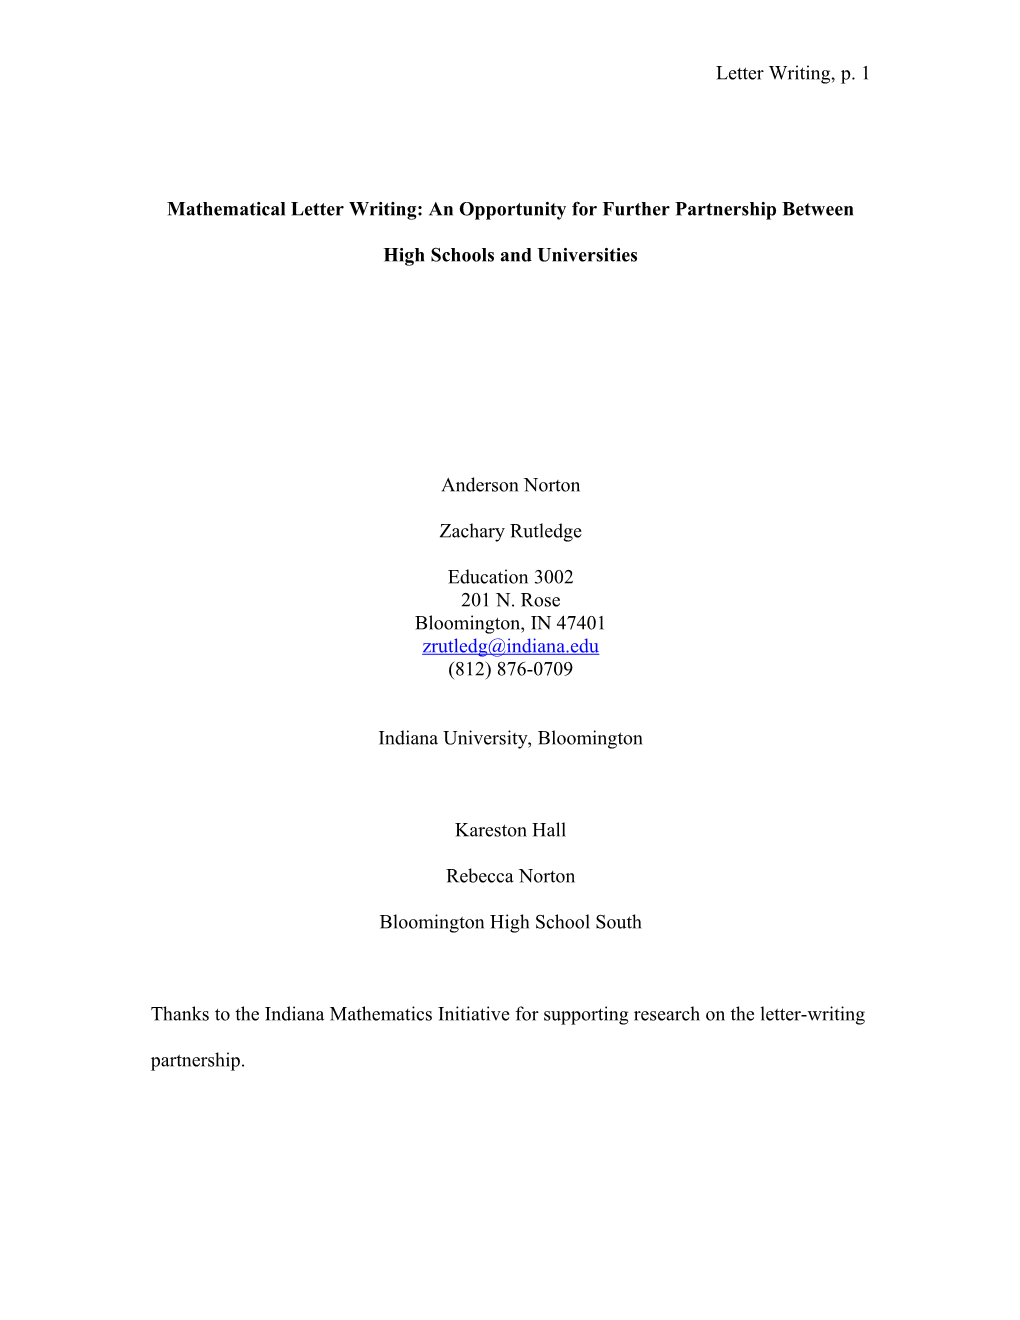 Mathematical Letter Writing: an Opportunity for Further Partnership Between High Schools